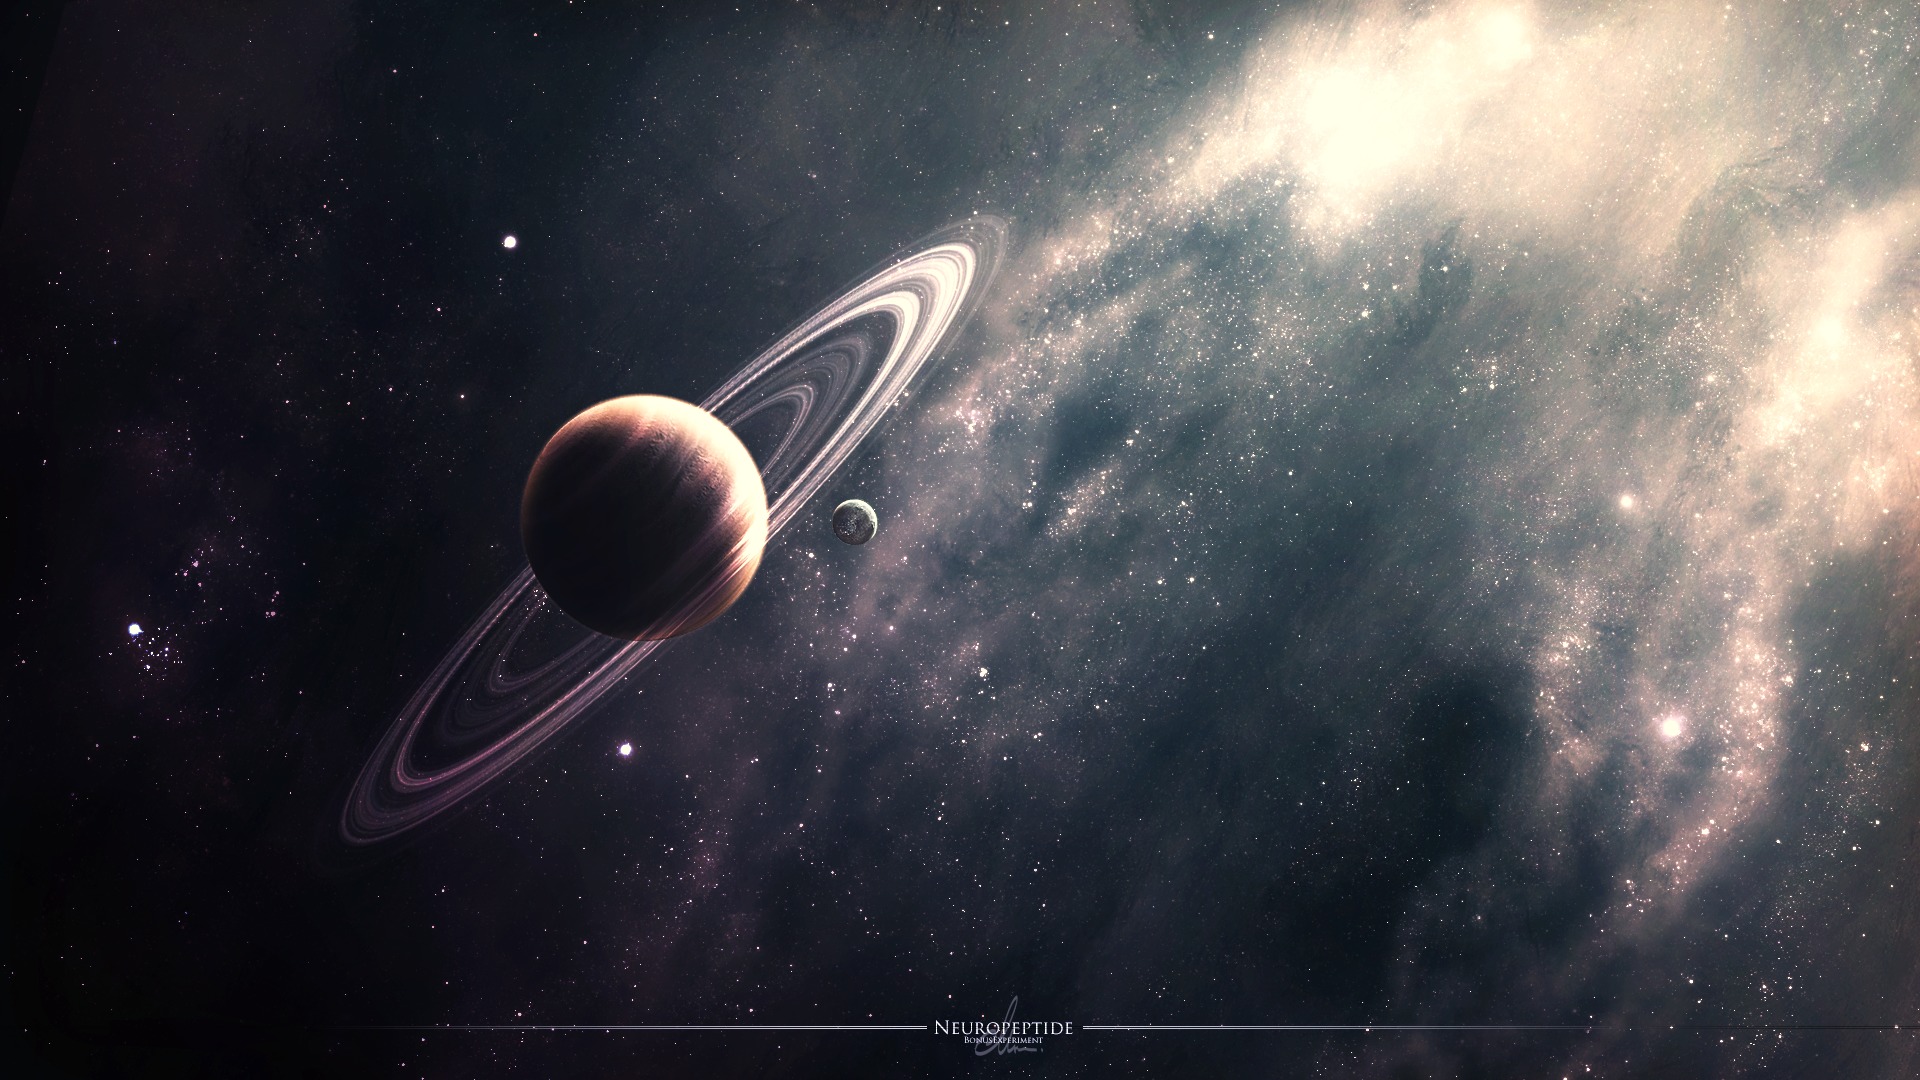 Space Planet Rings Nebula Star Wallpaper - Planet With Rings Hd , HD Wallpaper & Backgrounds